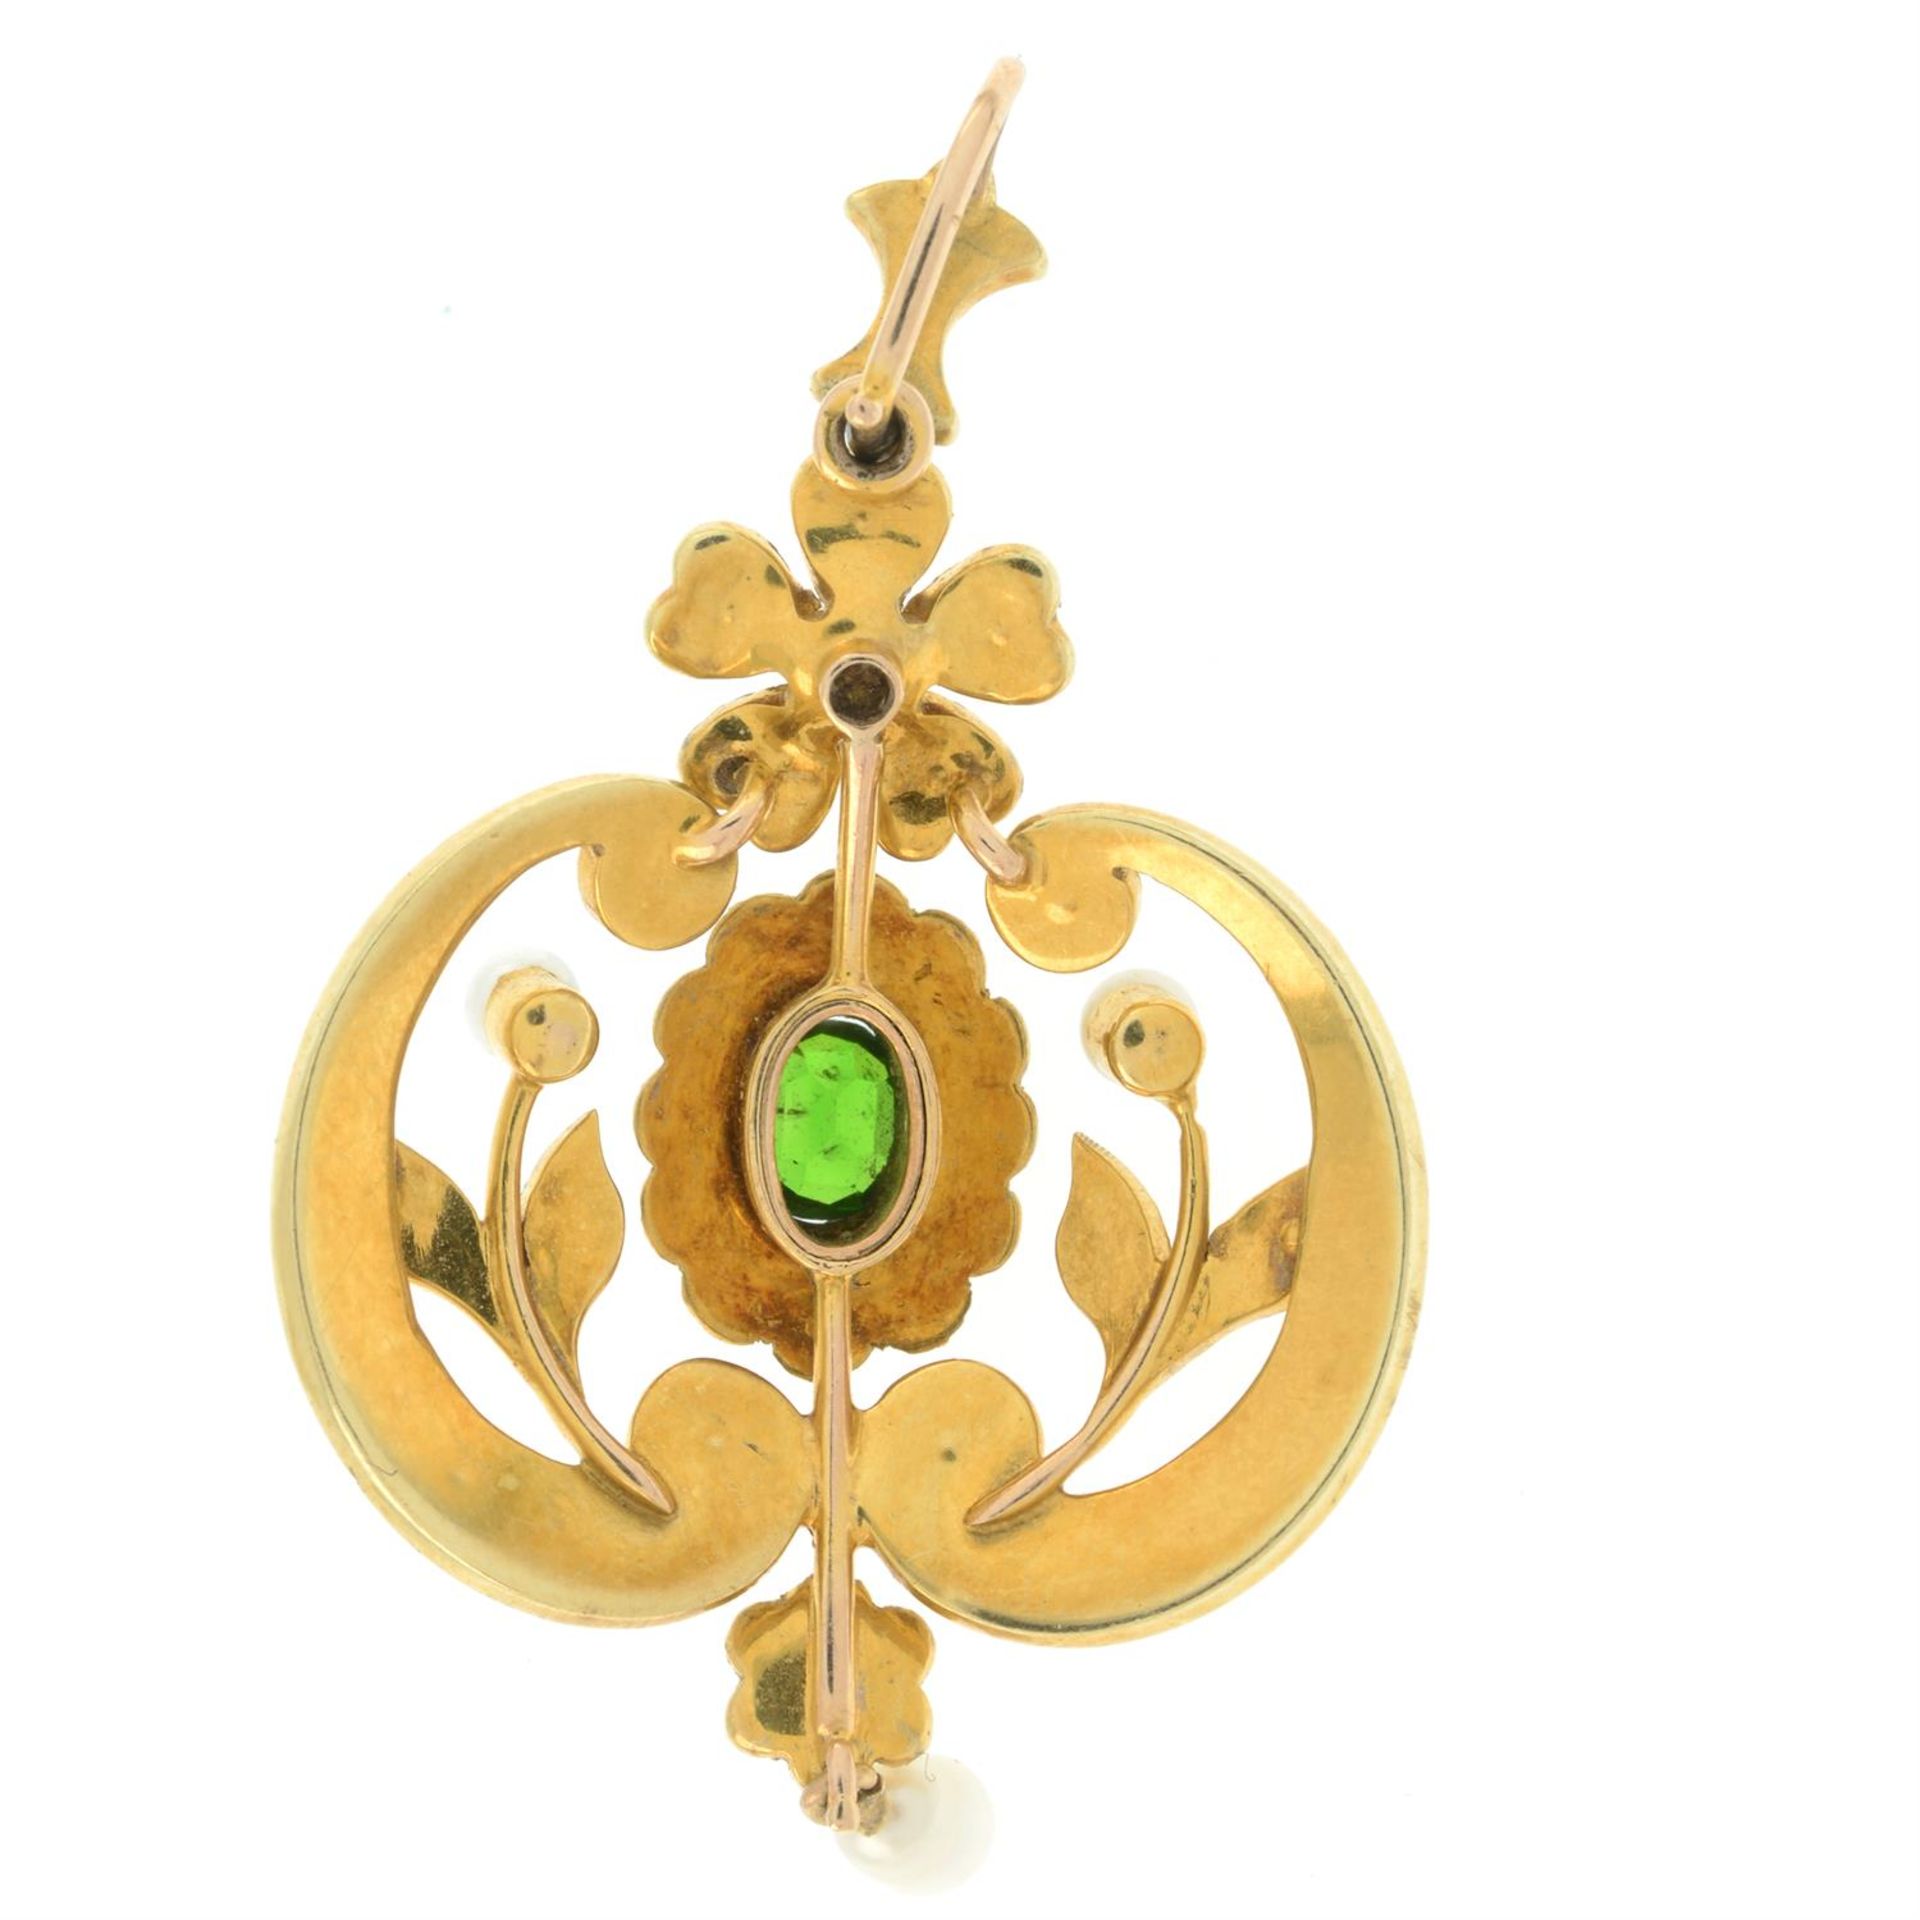 An early 20th century gold tsavorite garnet, seed and split pearl pendant. - Image 3 of 4